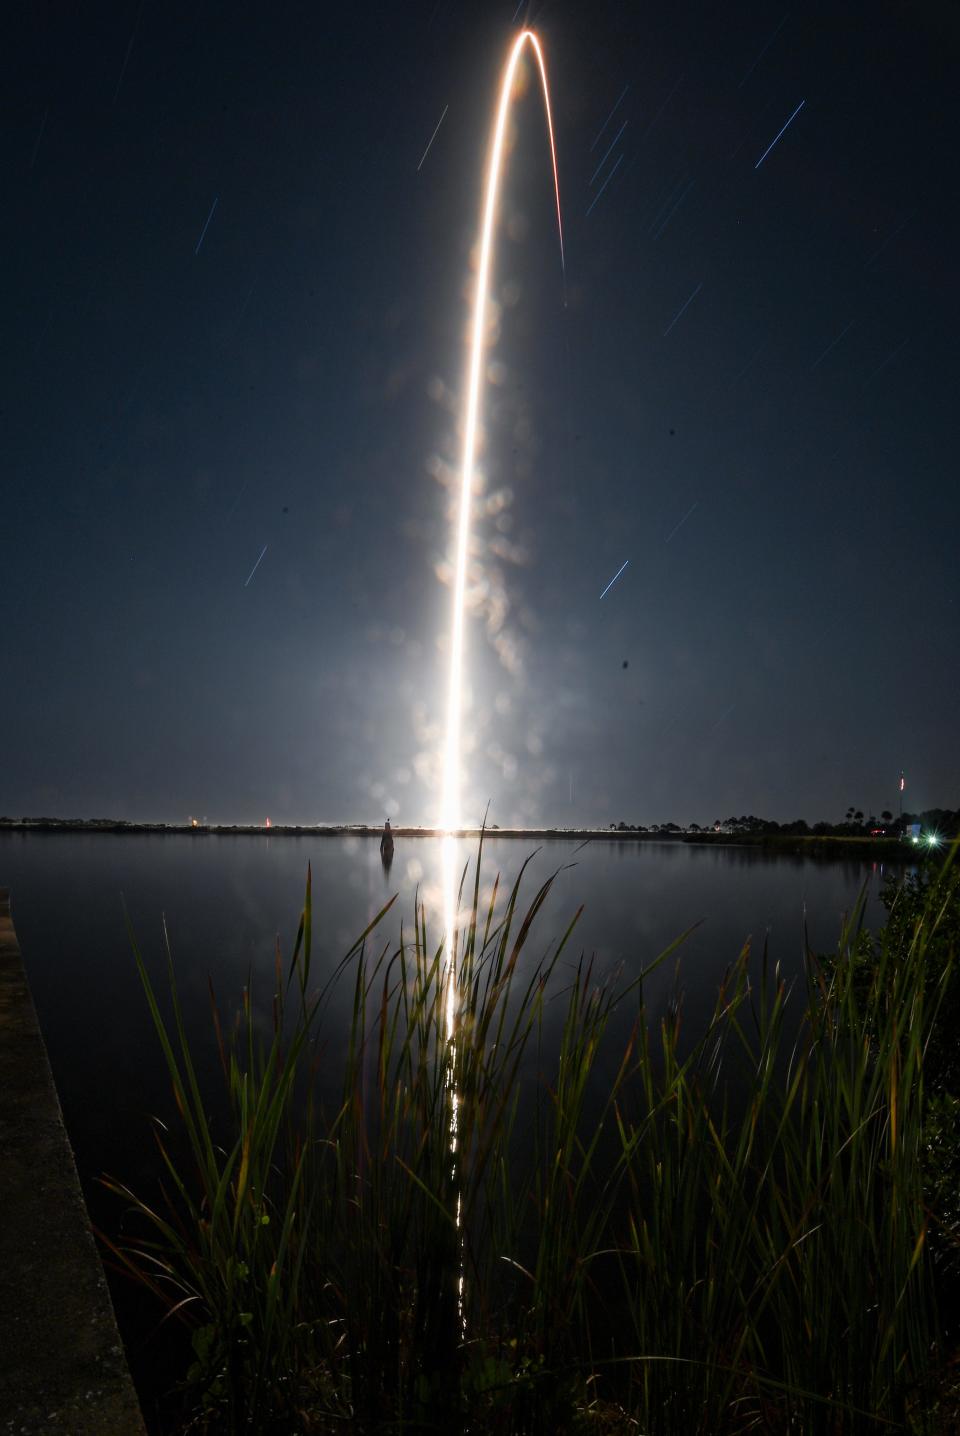 A SpaceX Falcon 9 rocket lifts off early Wednesday morning from Cape Canaveral Space Force Station.